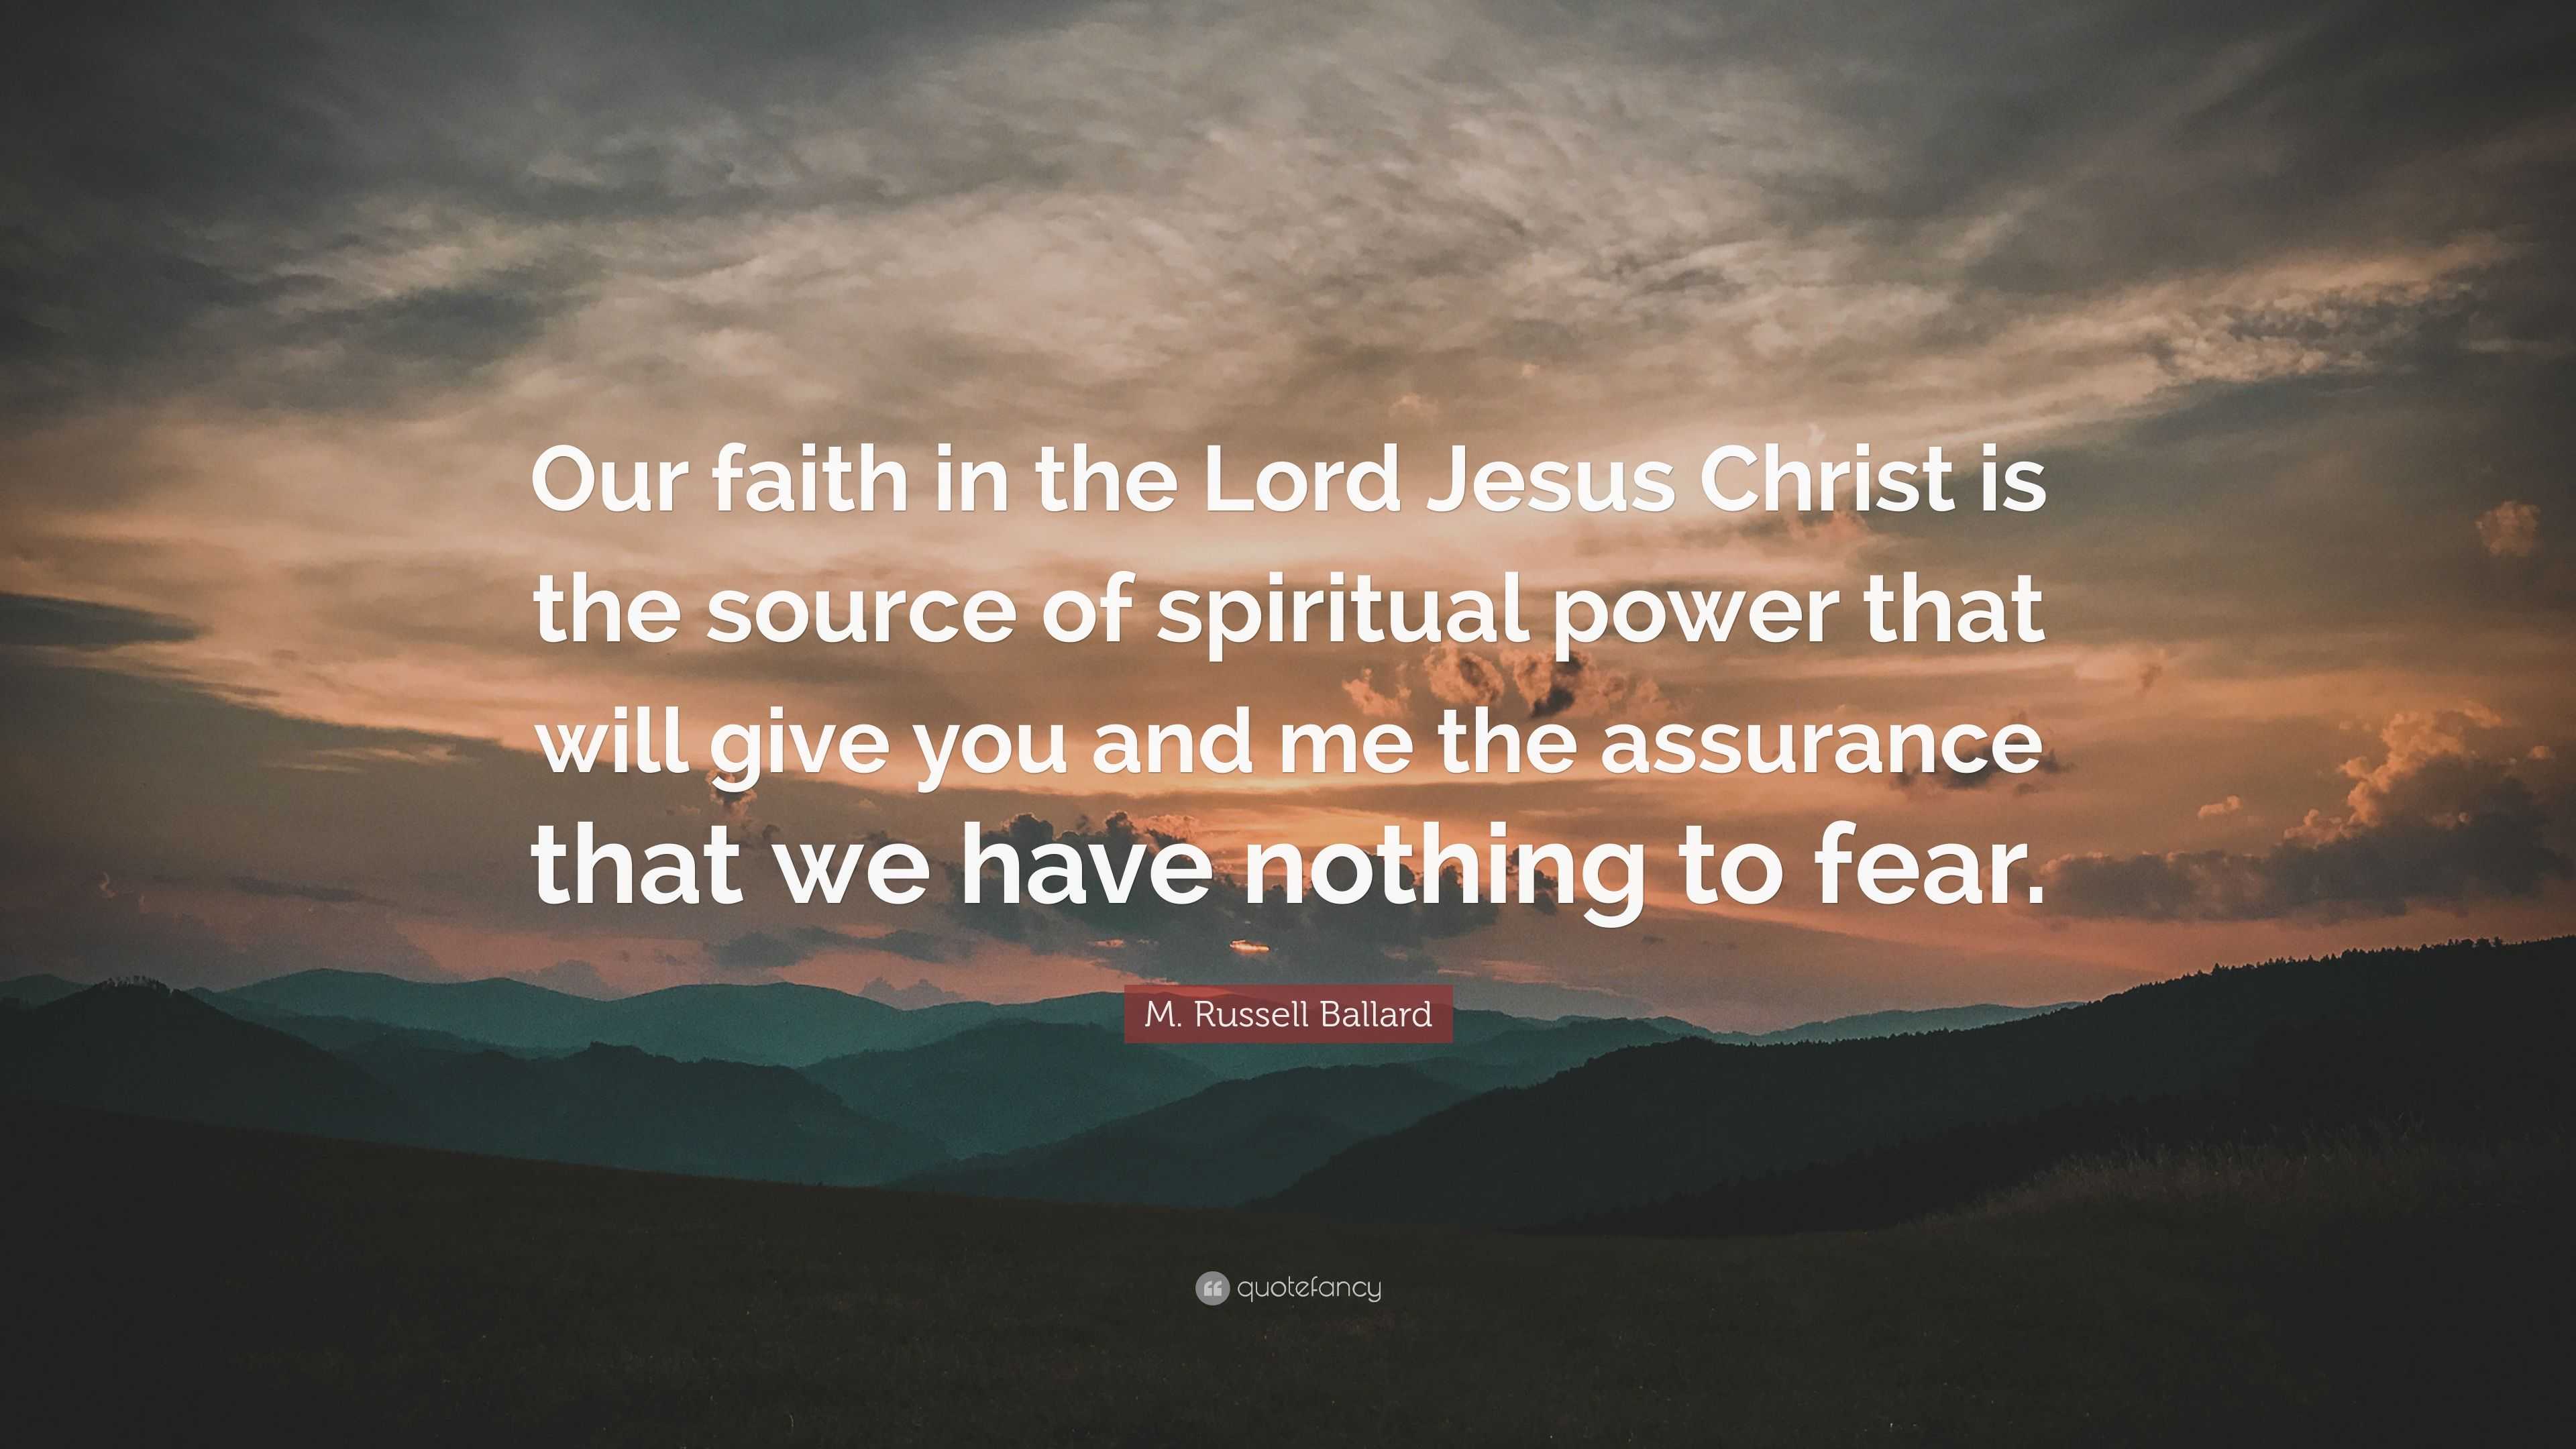 M. Russell Ballard Quote: “Our faith in the Lord Jesus Christ is the ...